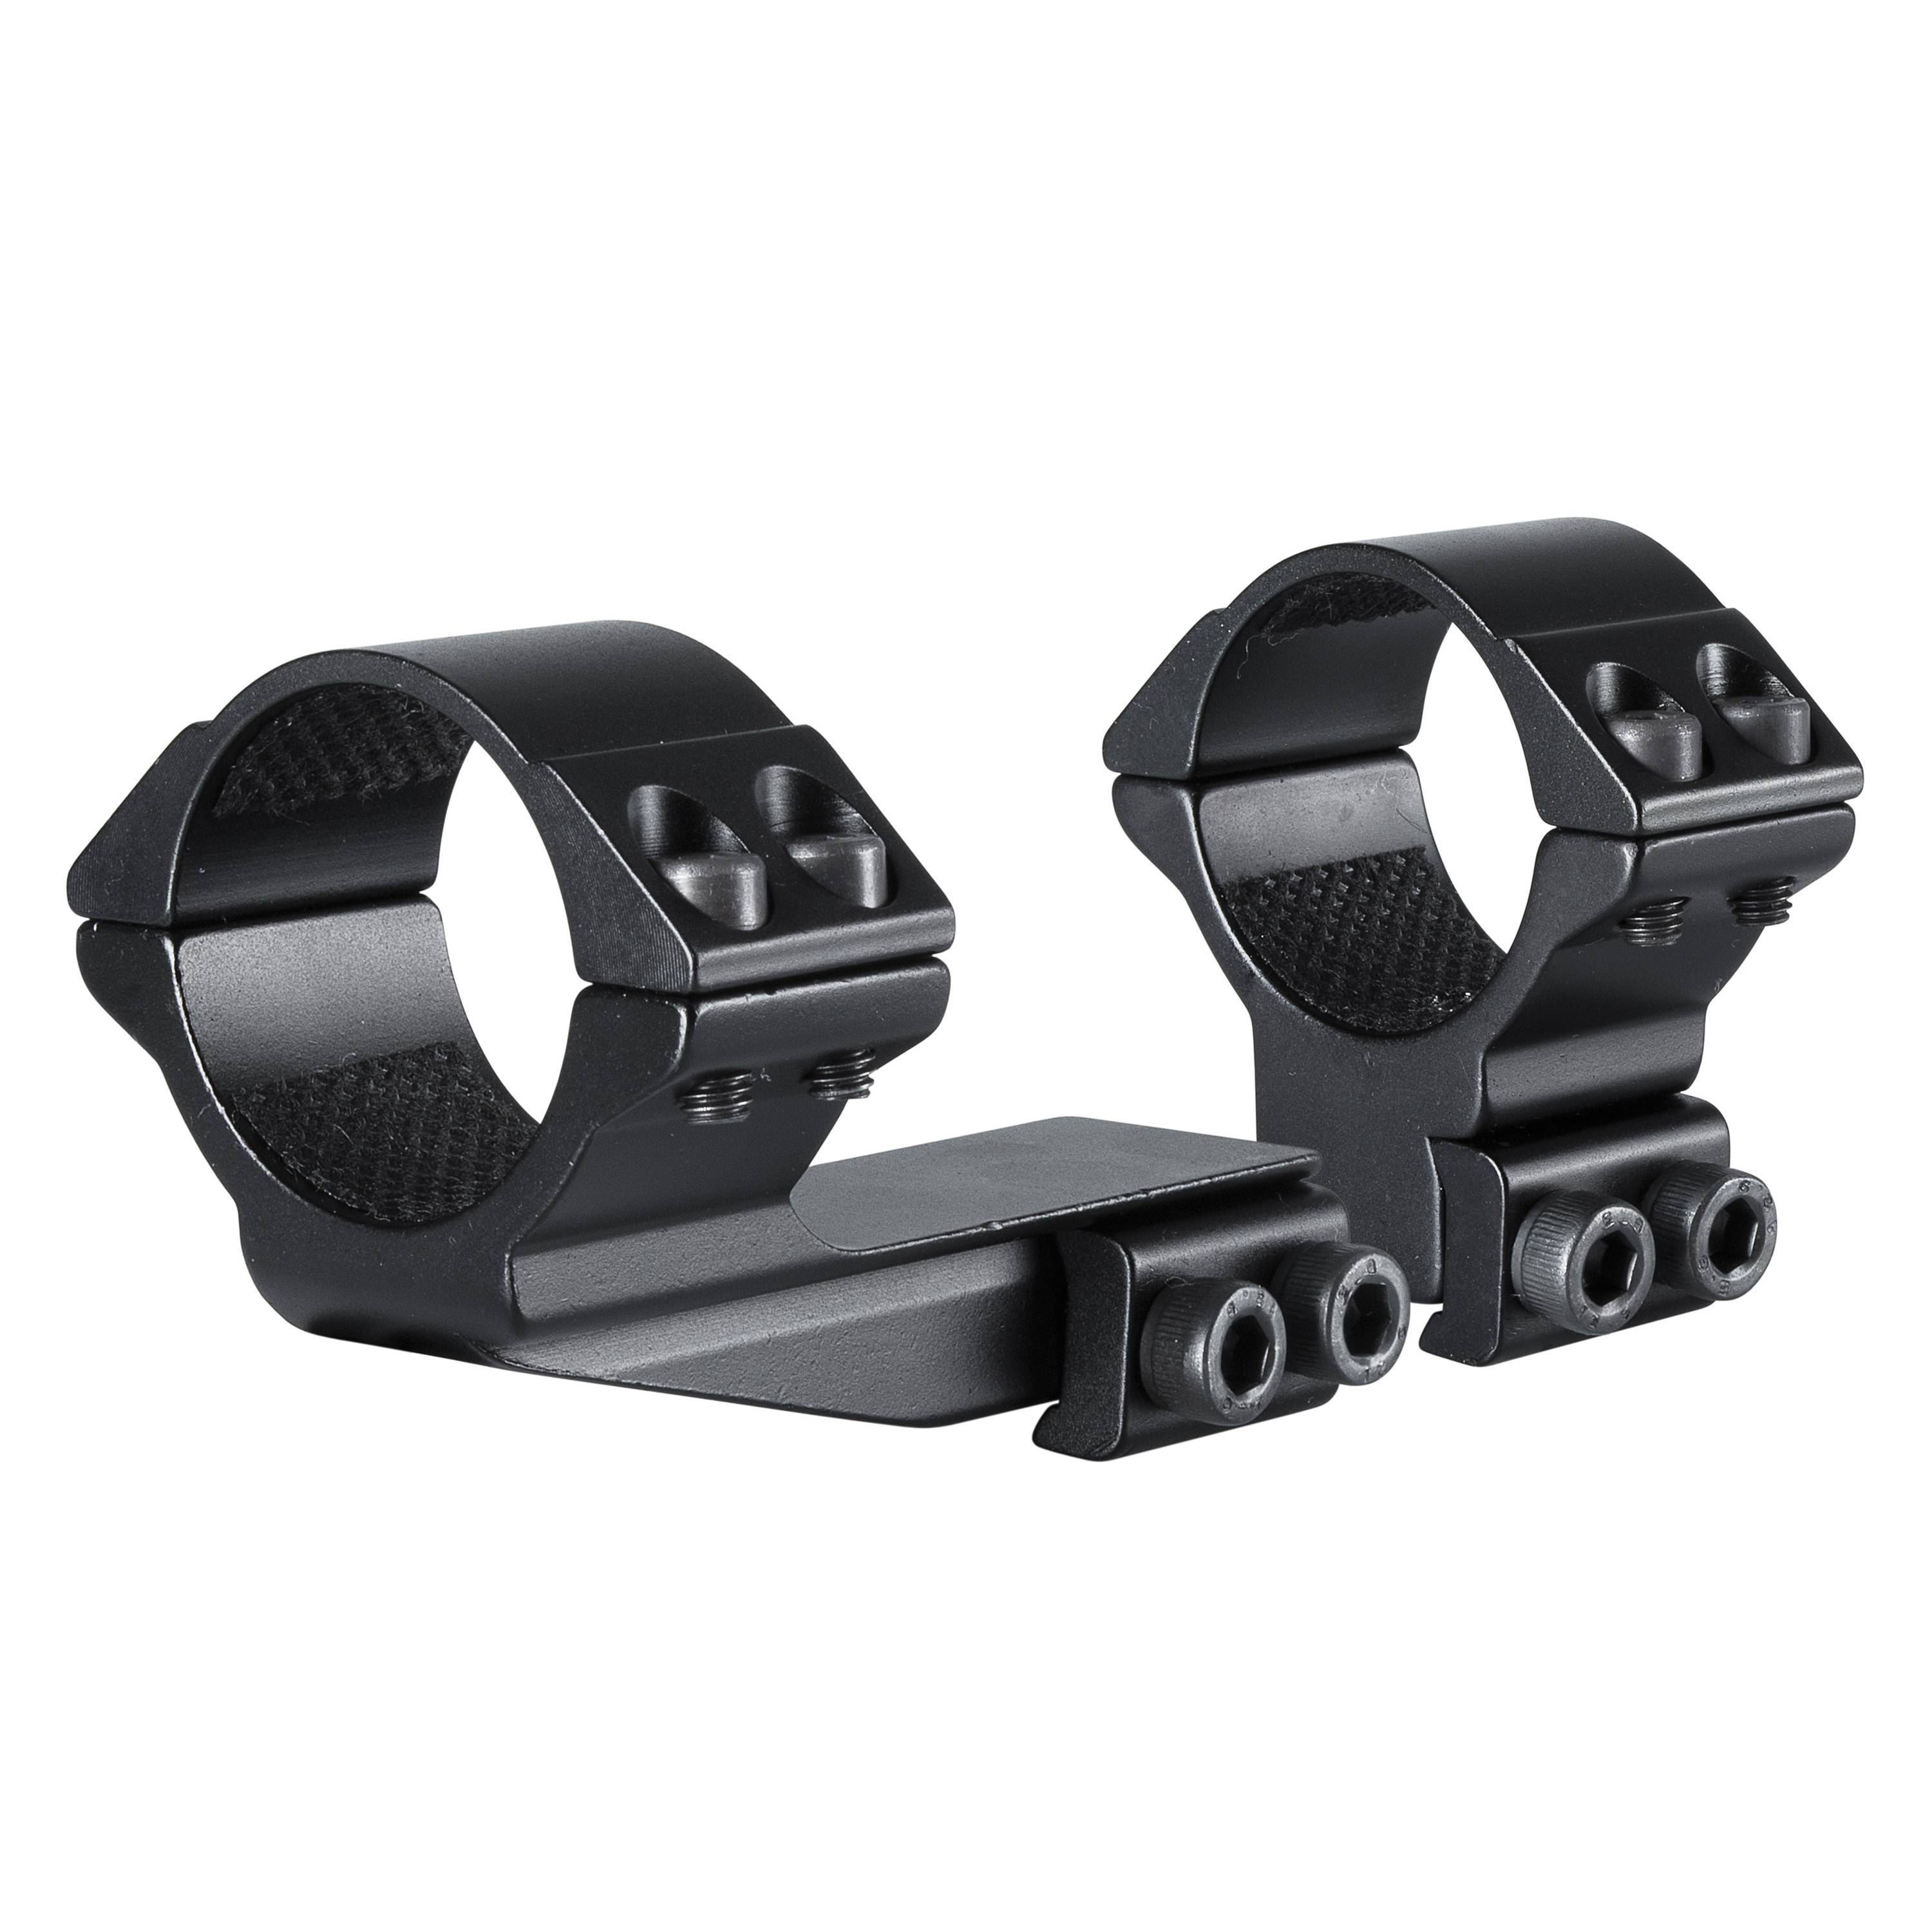 Hawke Extension Ring Mounts - 9-11mm 30mm High 2